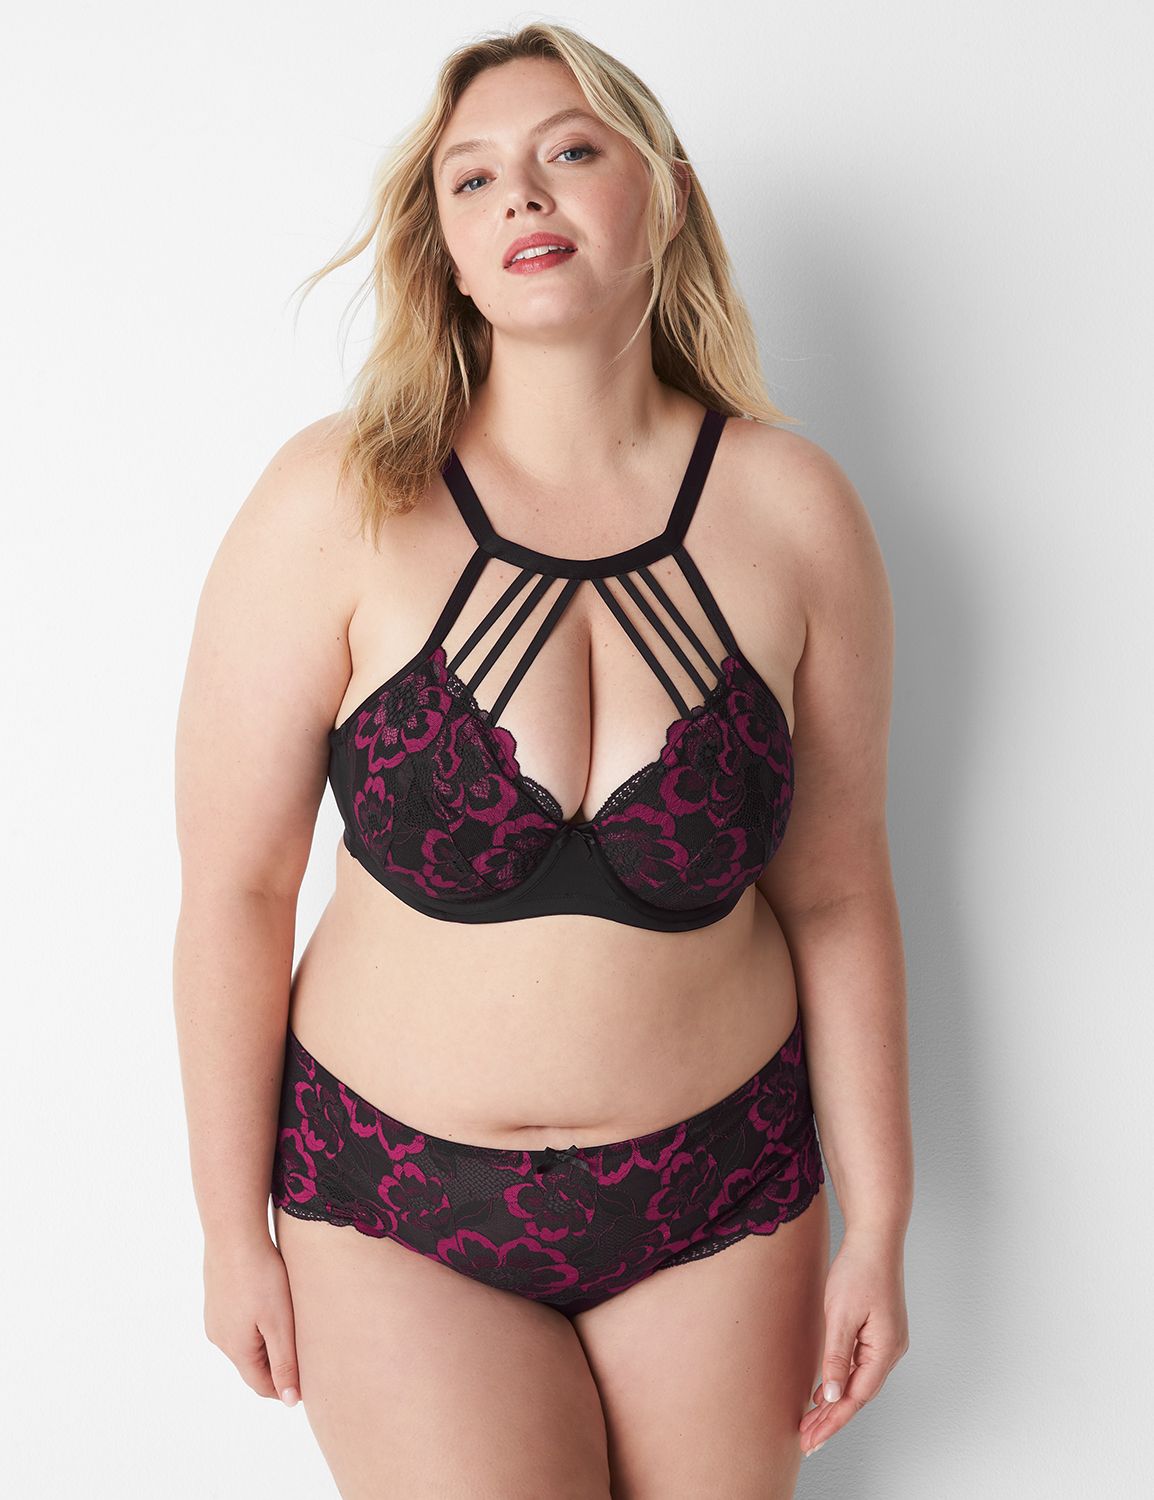 Lane Bryant Cacique Black Lightly Lined Multi Way Strapless in 44DD Size  undefined - $15 - From Mary